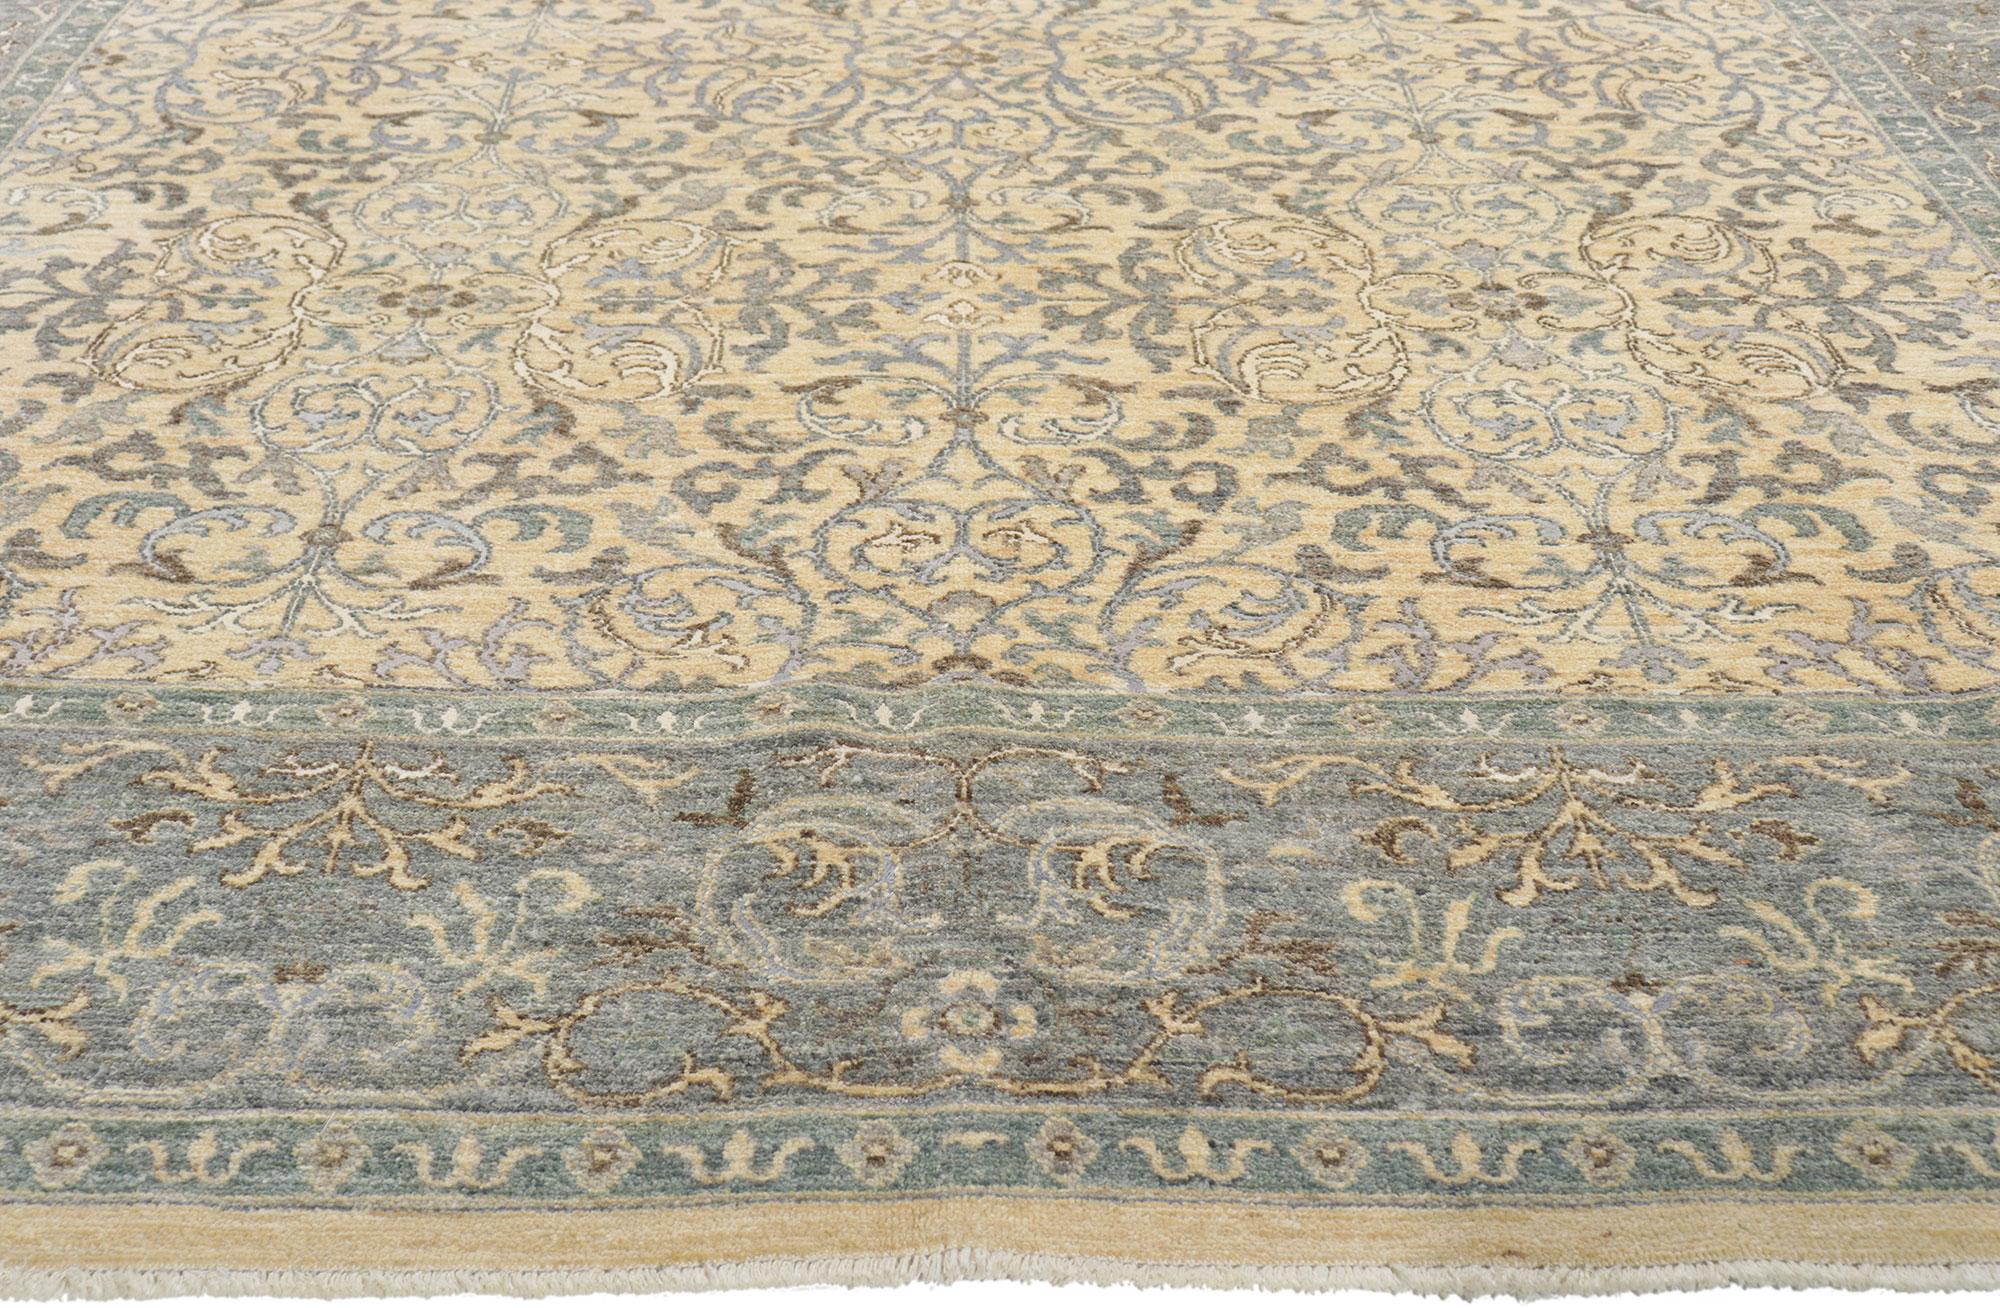 Pakistani New Transitional Damask Scroll Rug with Soft Earth-Tone Colors For Sale